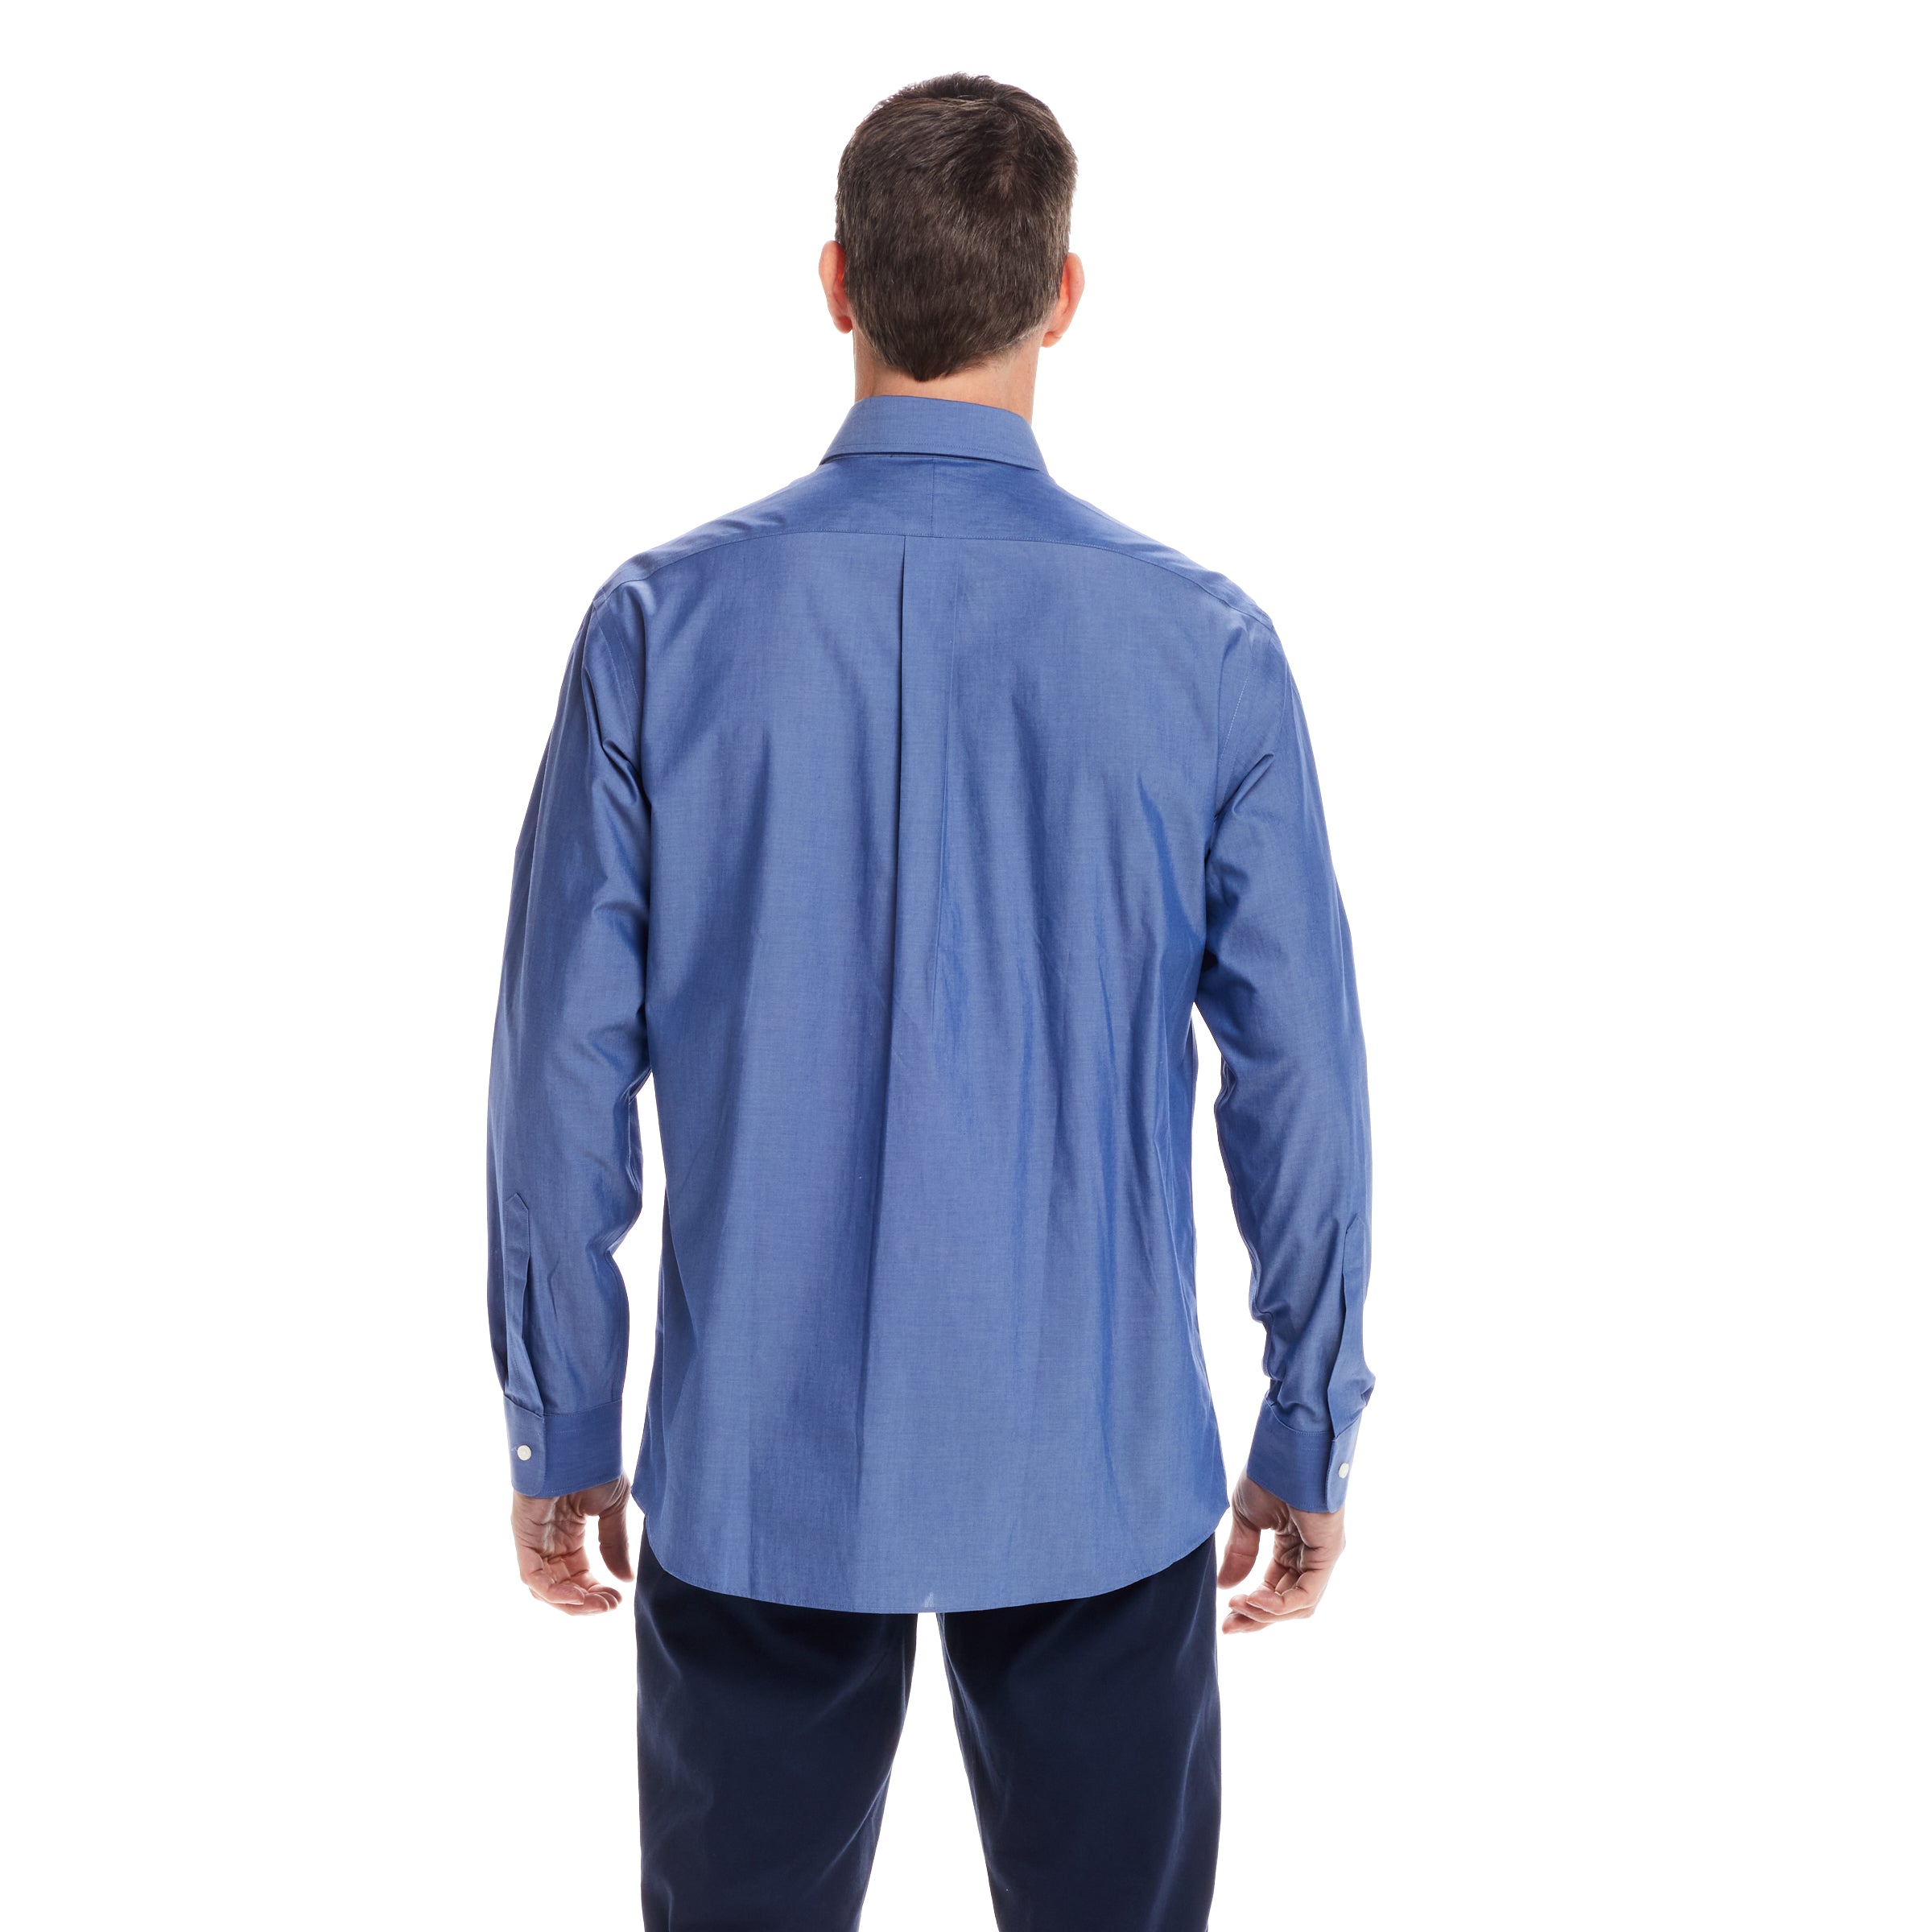 Long Sleeve Blue Chambray Shirt with Magnetic Closures